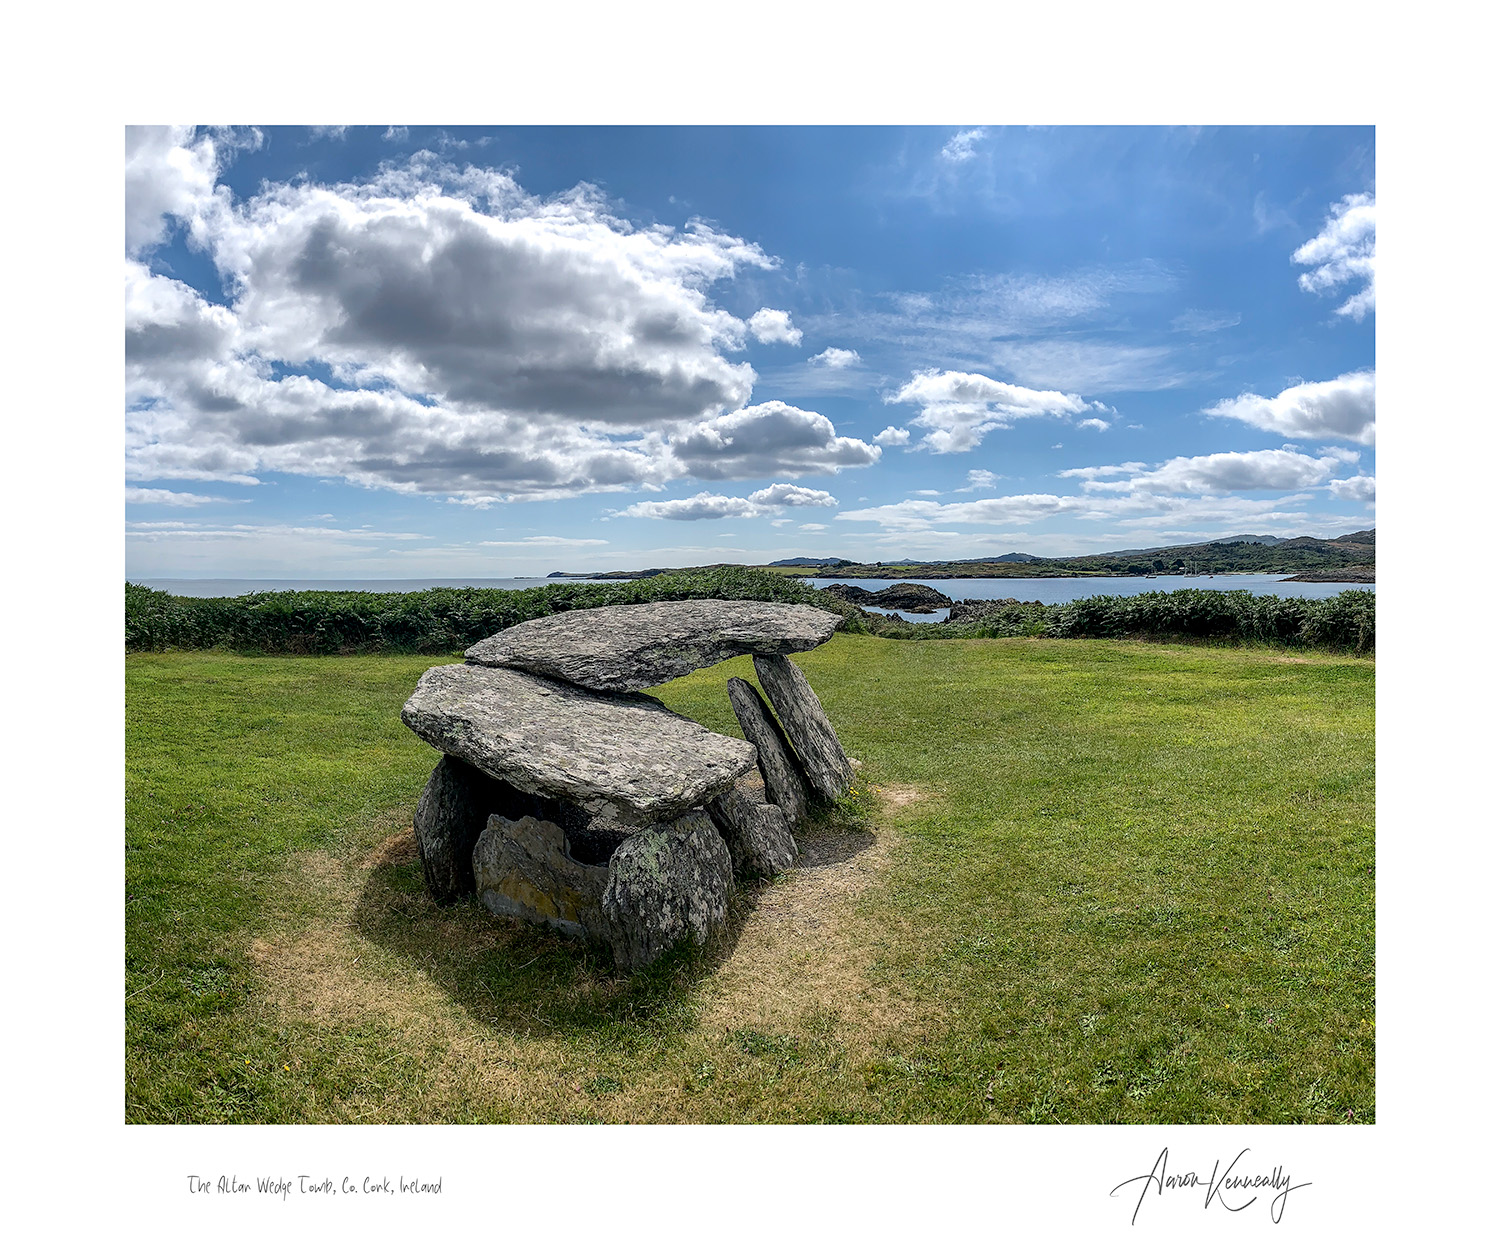 The Altar Wedge Tomb, Co. Cork, Ireland